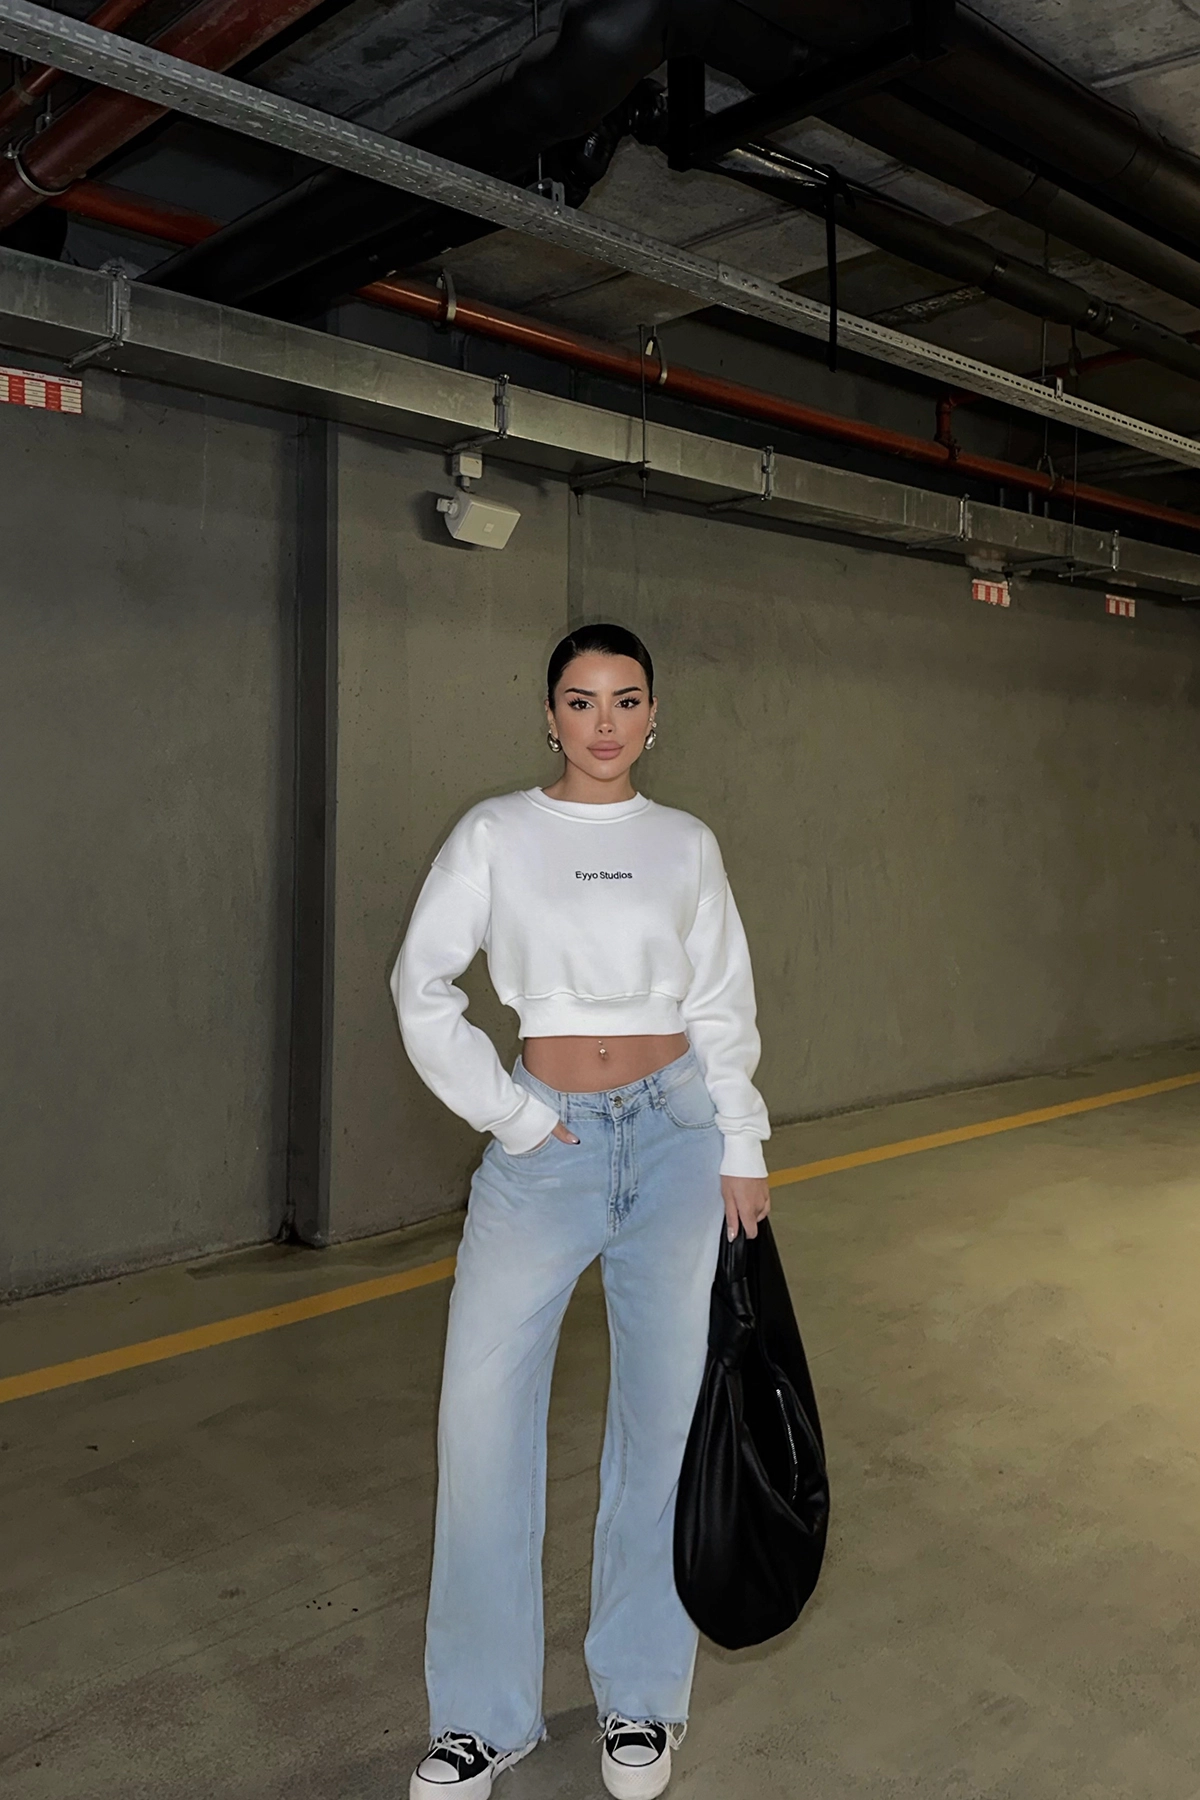 EYY Women White Long Sleeve Crop Top with Eyyo Written on the Front - Troy